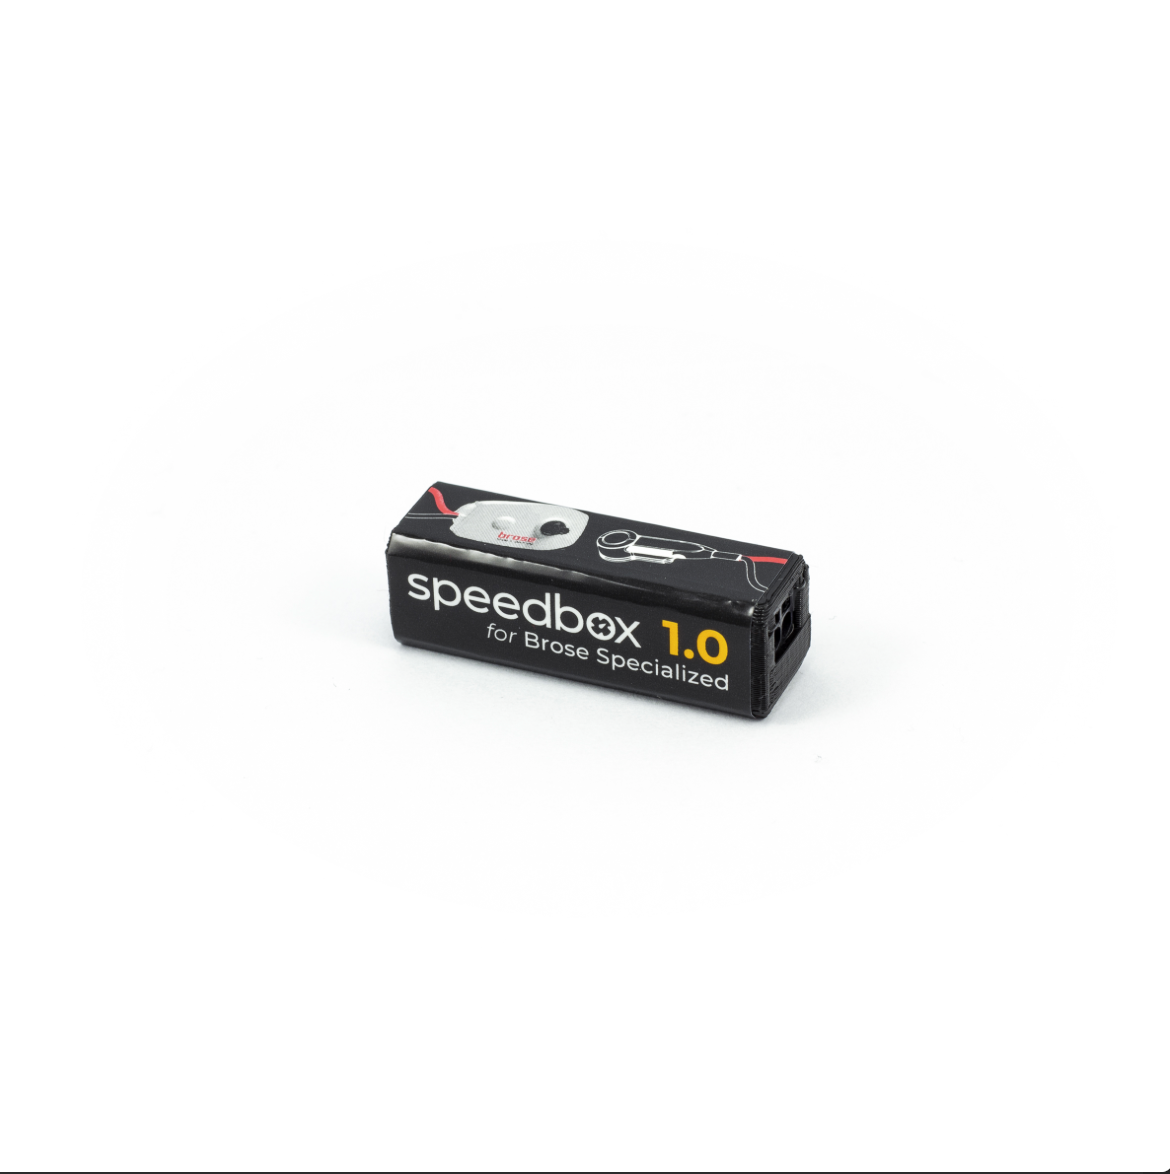 SpeedBox 1.0 for Brose and Brose Specialized Motor